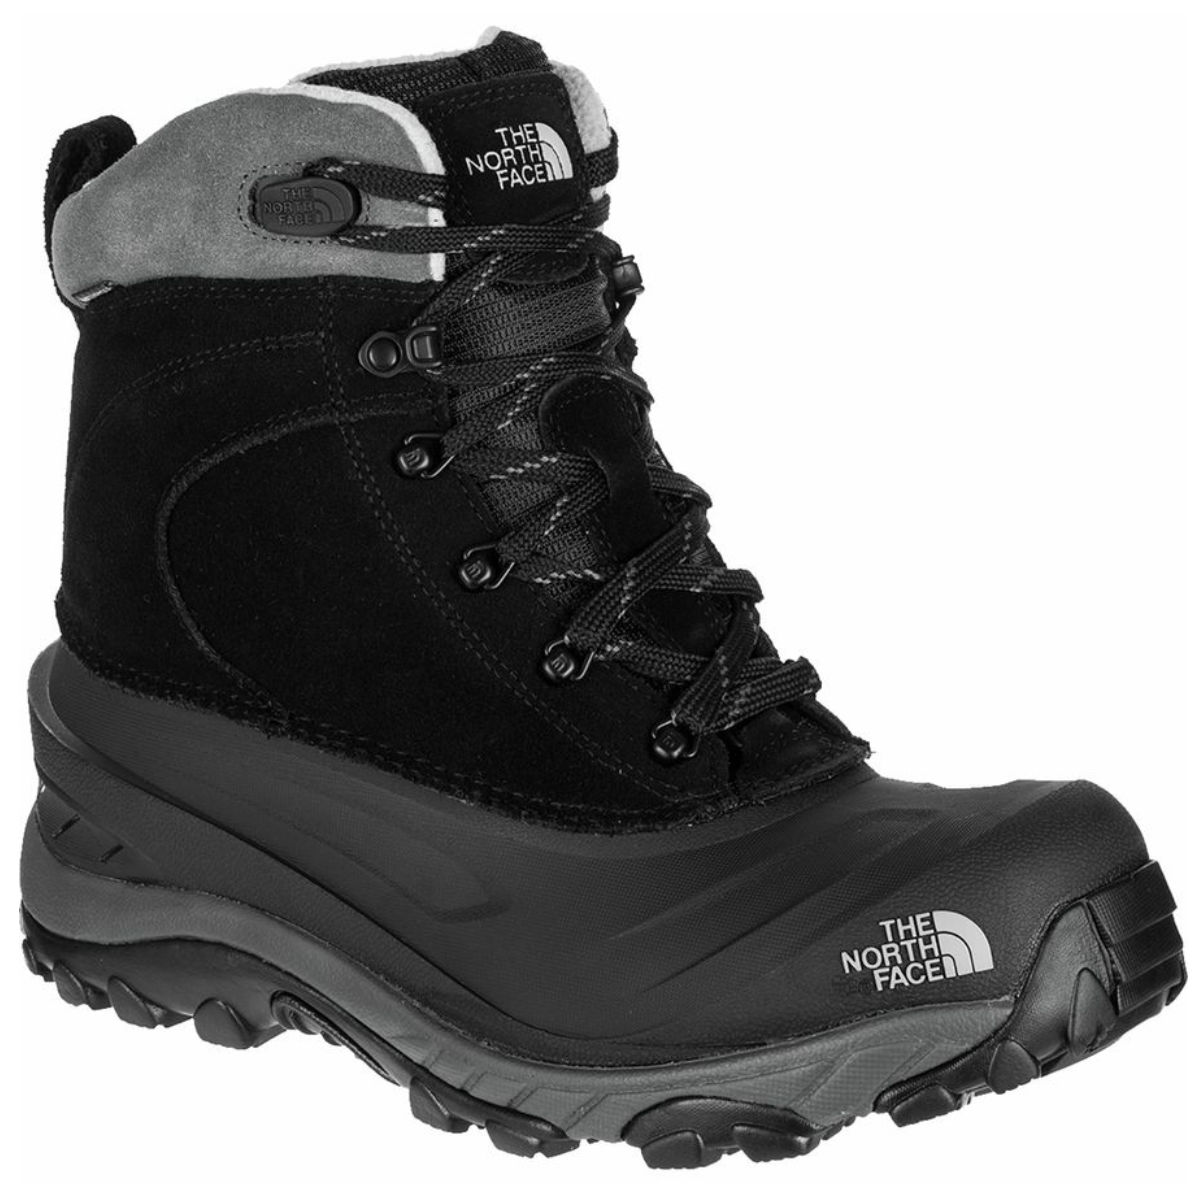 The North Face Chilkat III Men's Boots